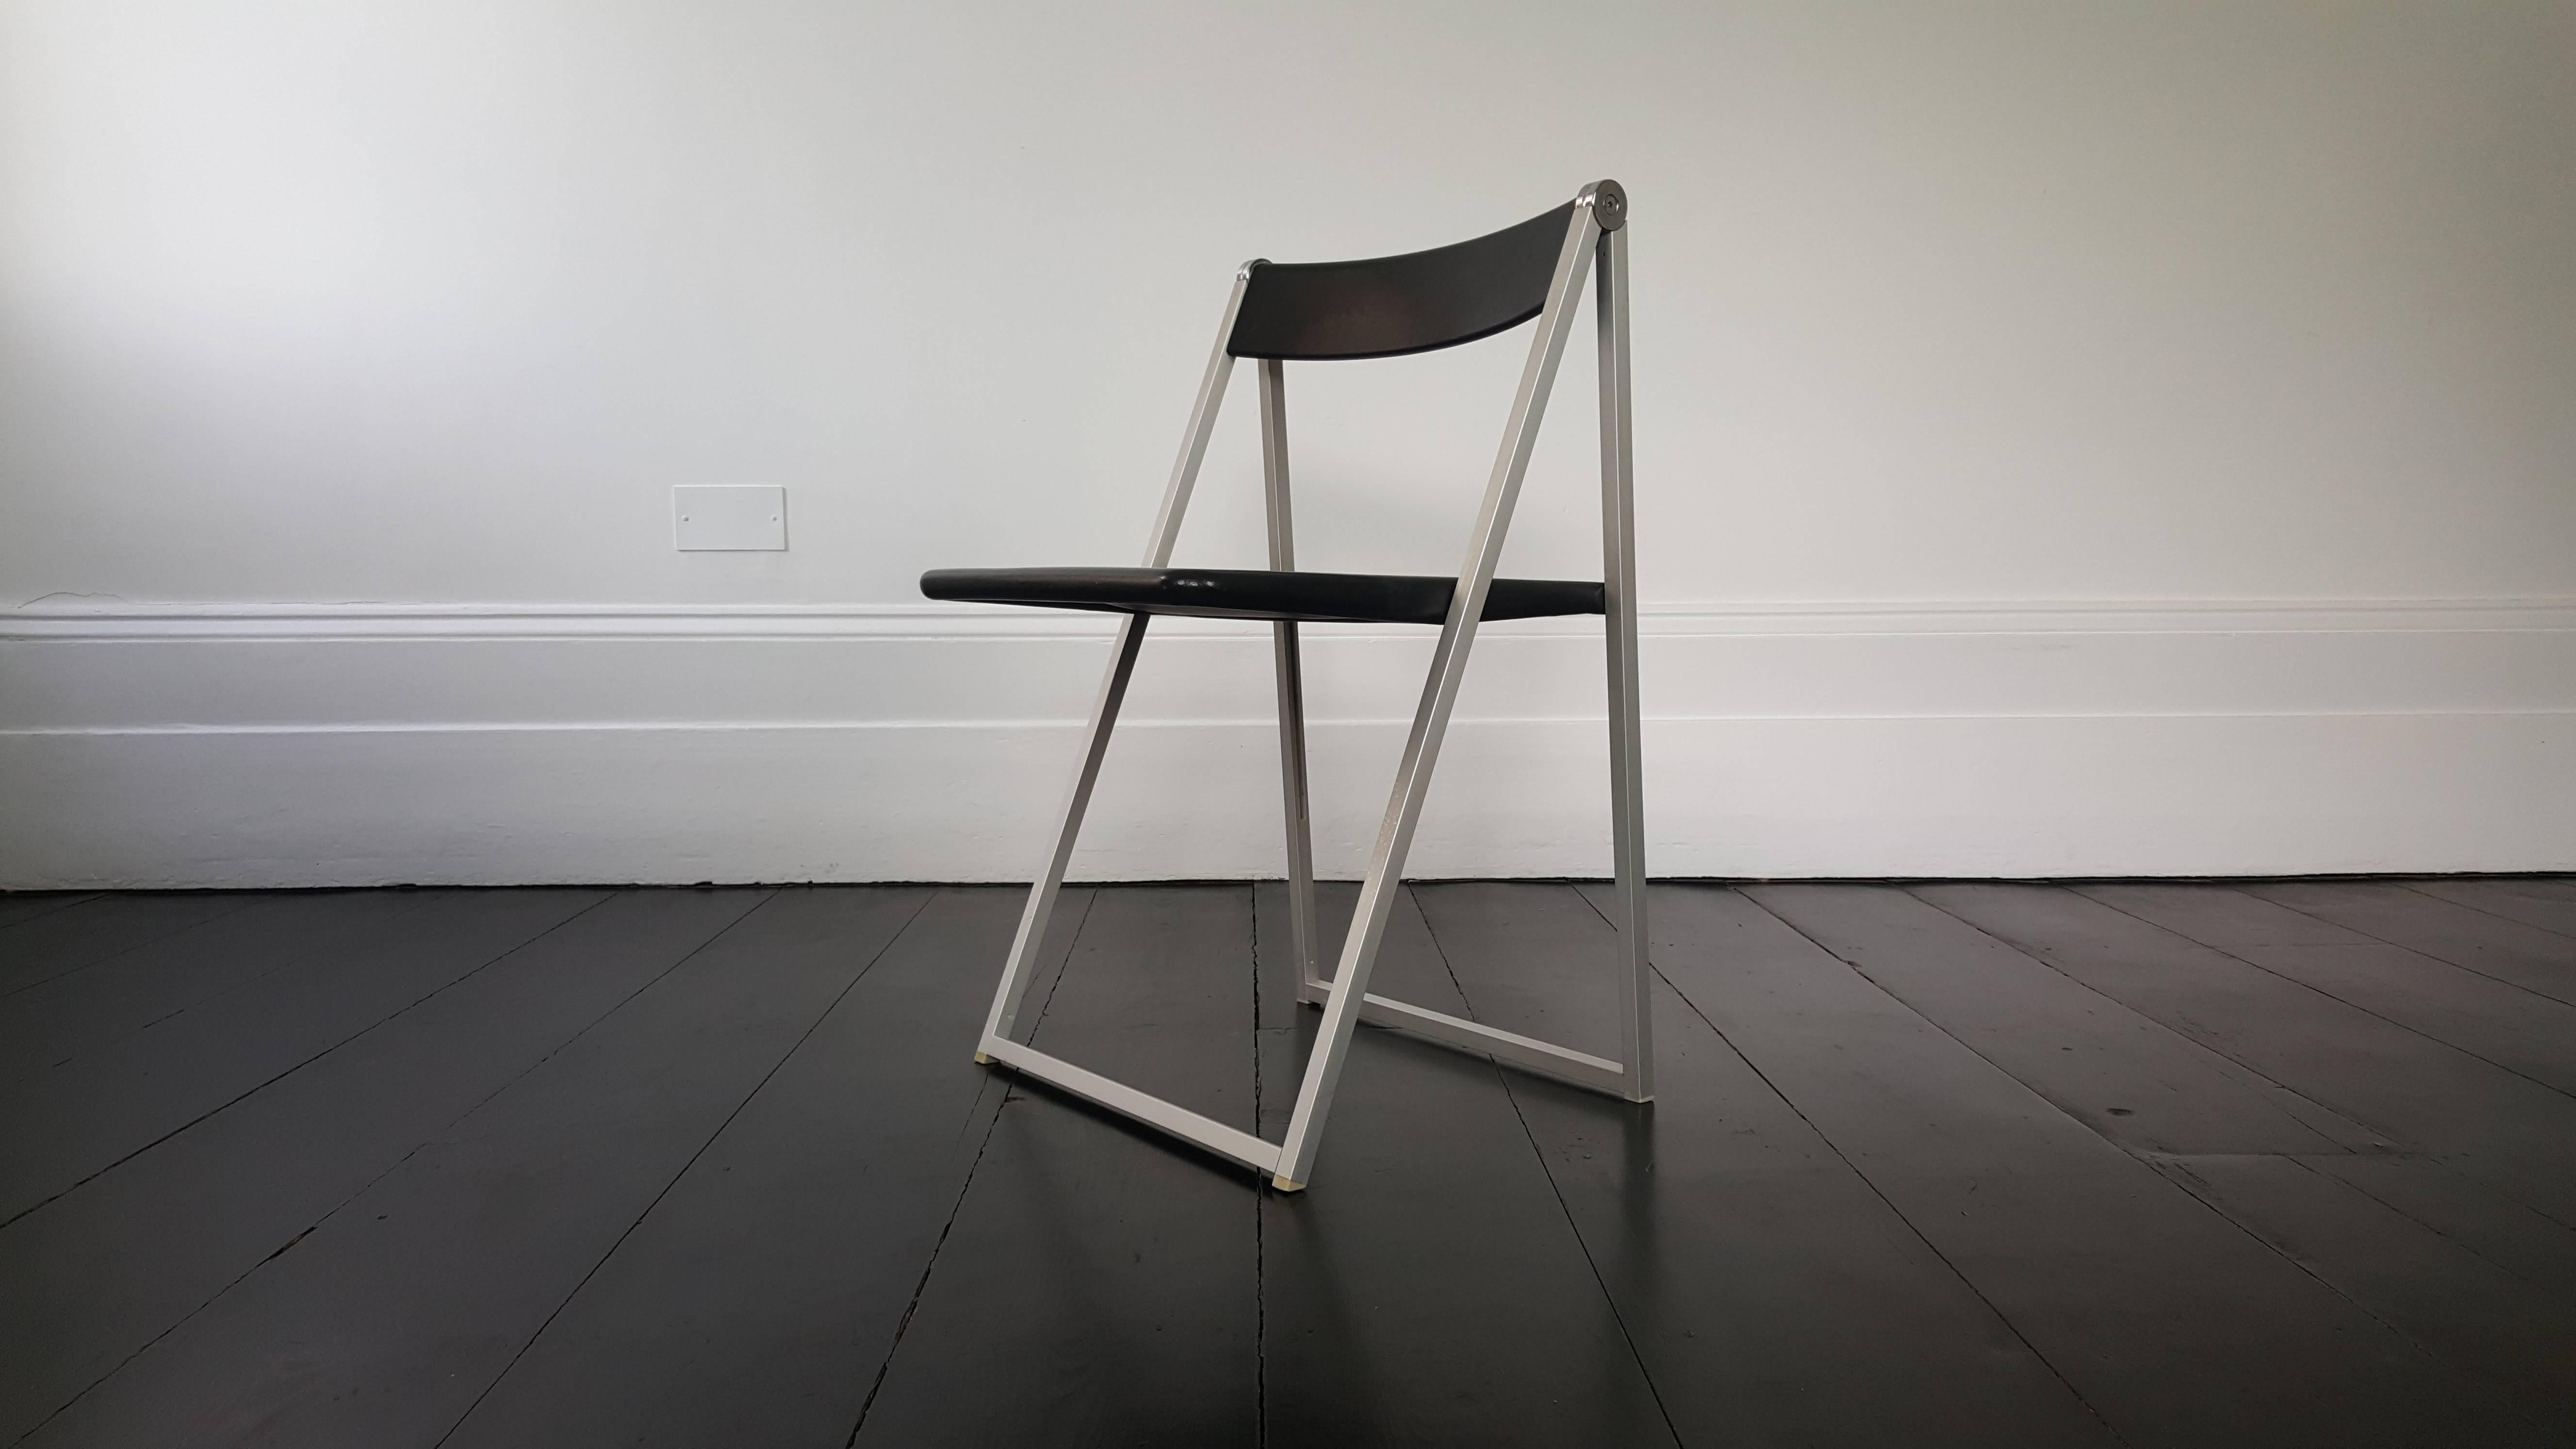 Mid-Century Modern Folding Chair, Designed in 1971 by Team Form AG, Manufactured by Interlübke